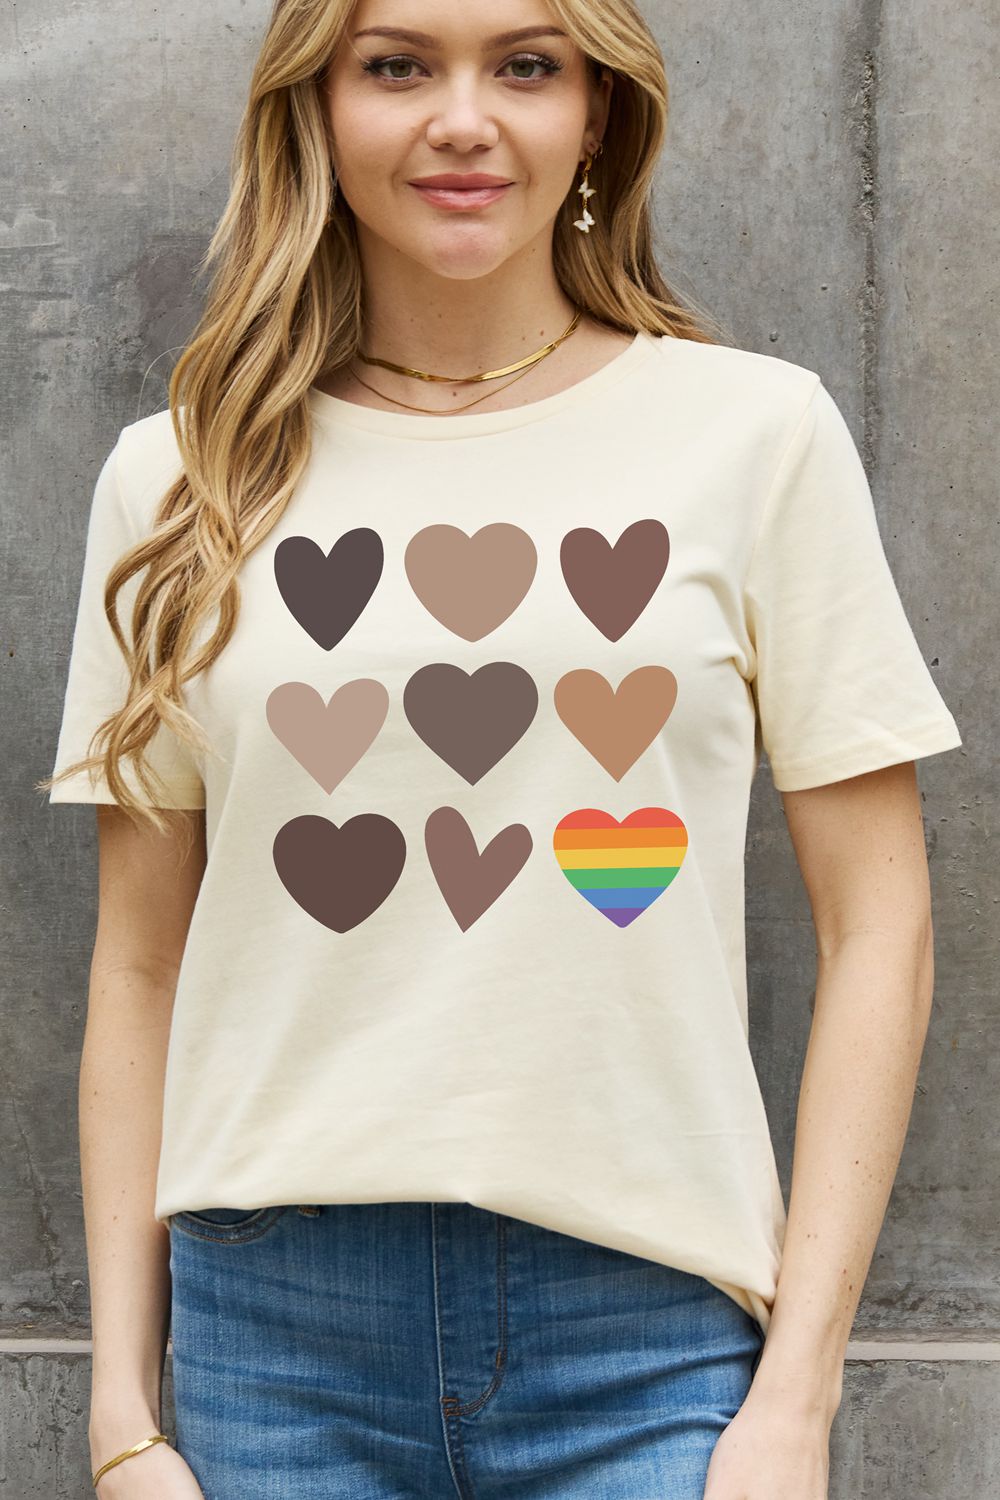 Full Size Heart Graphic Cotton Tee - T-Shirts - Shirts & Tops - 5 - 2024